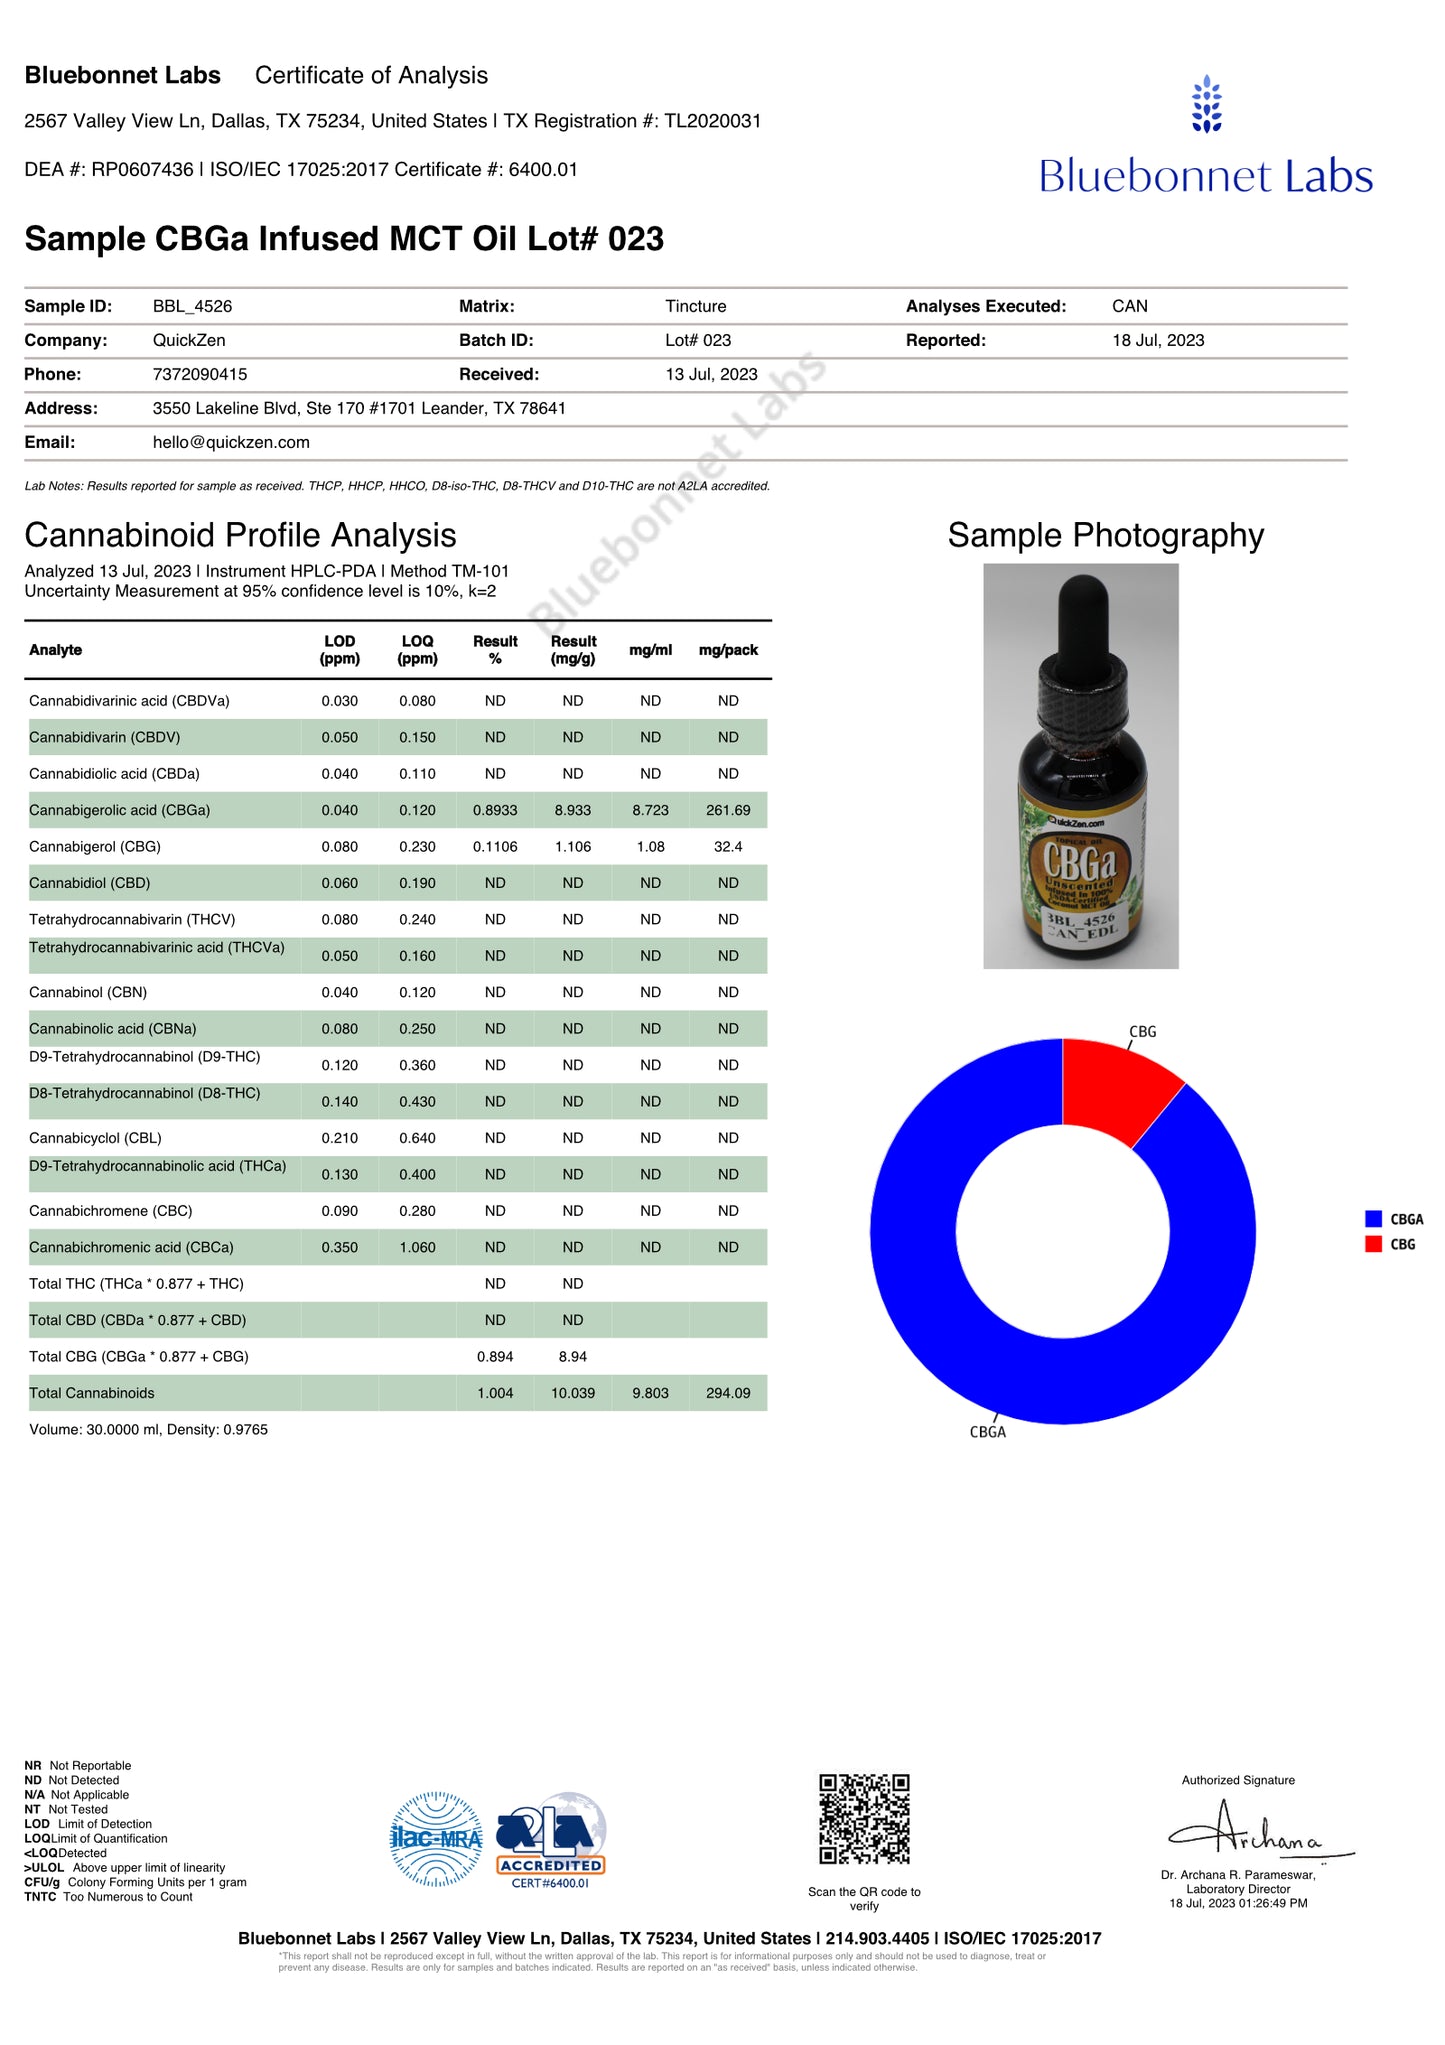 Lot 023 oil cannabinoids profile analysis. Blue Bonnet Laboratories Certified Test Results.